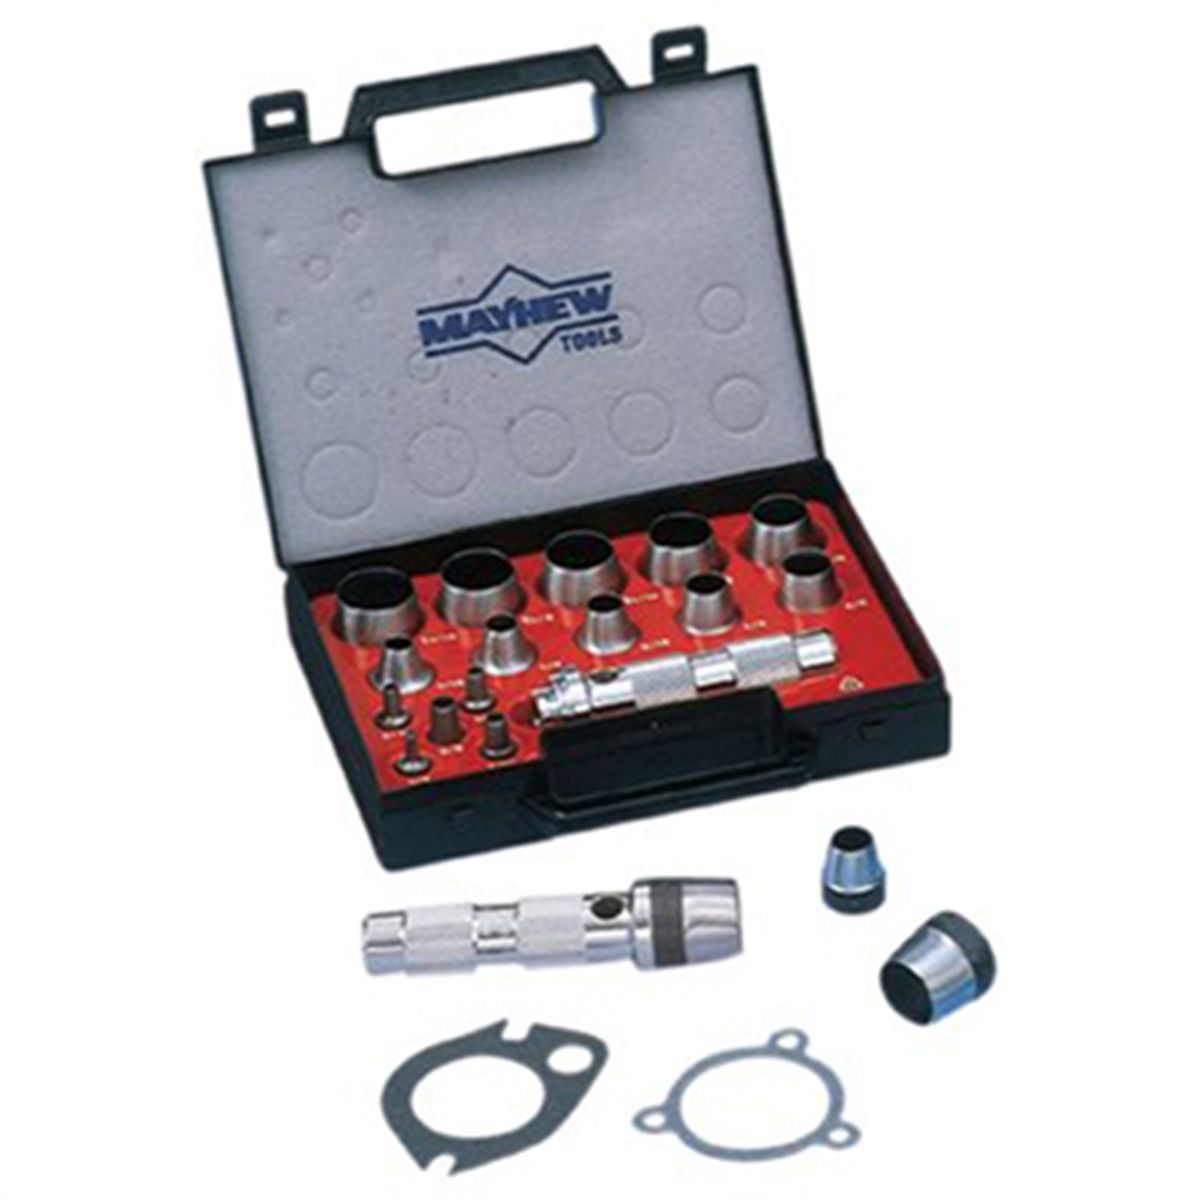 Metric Hollow Punch Set: 1/2 in_3/4 in_1 in_4 3/4 in Overall Lg, 16 Pieces,  Case, Metric, Hollow